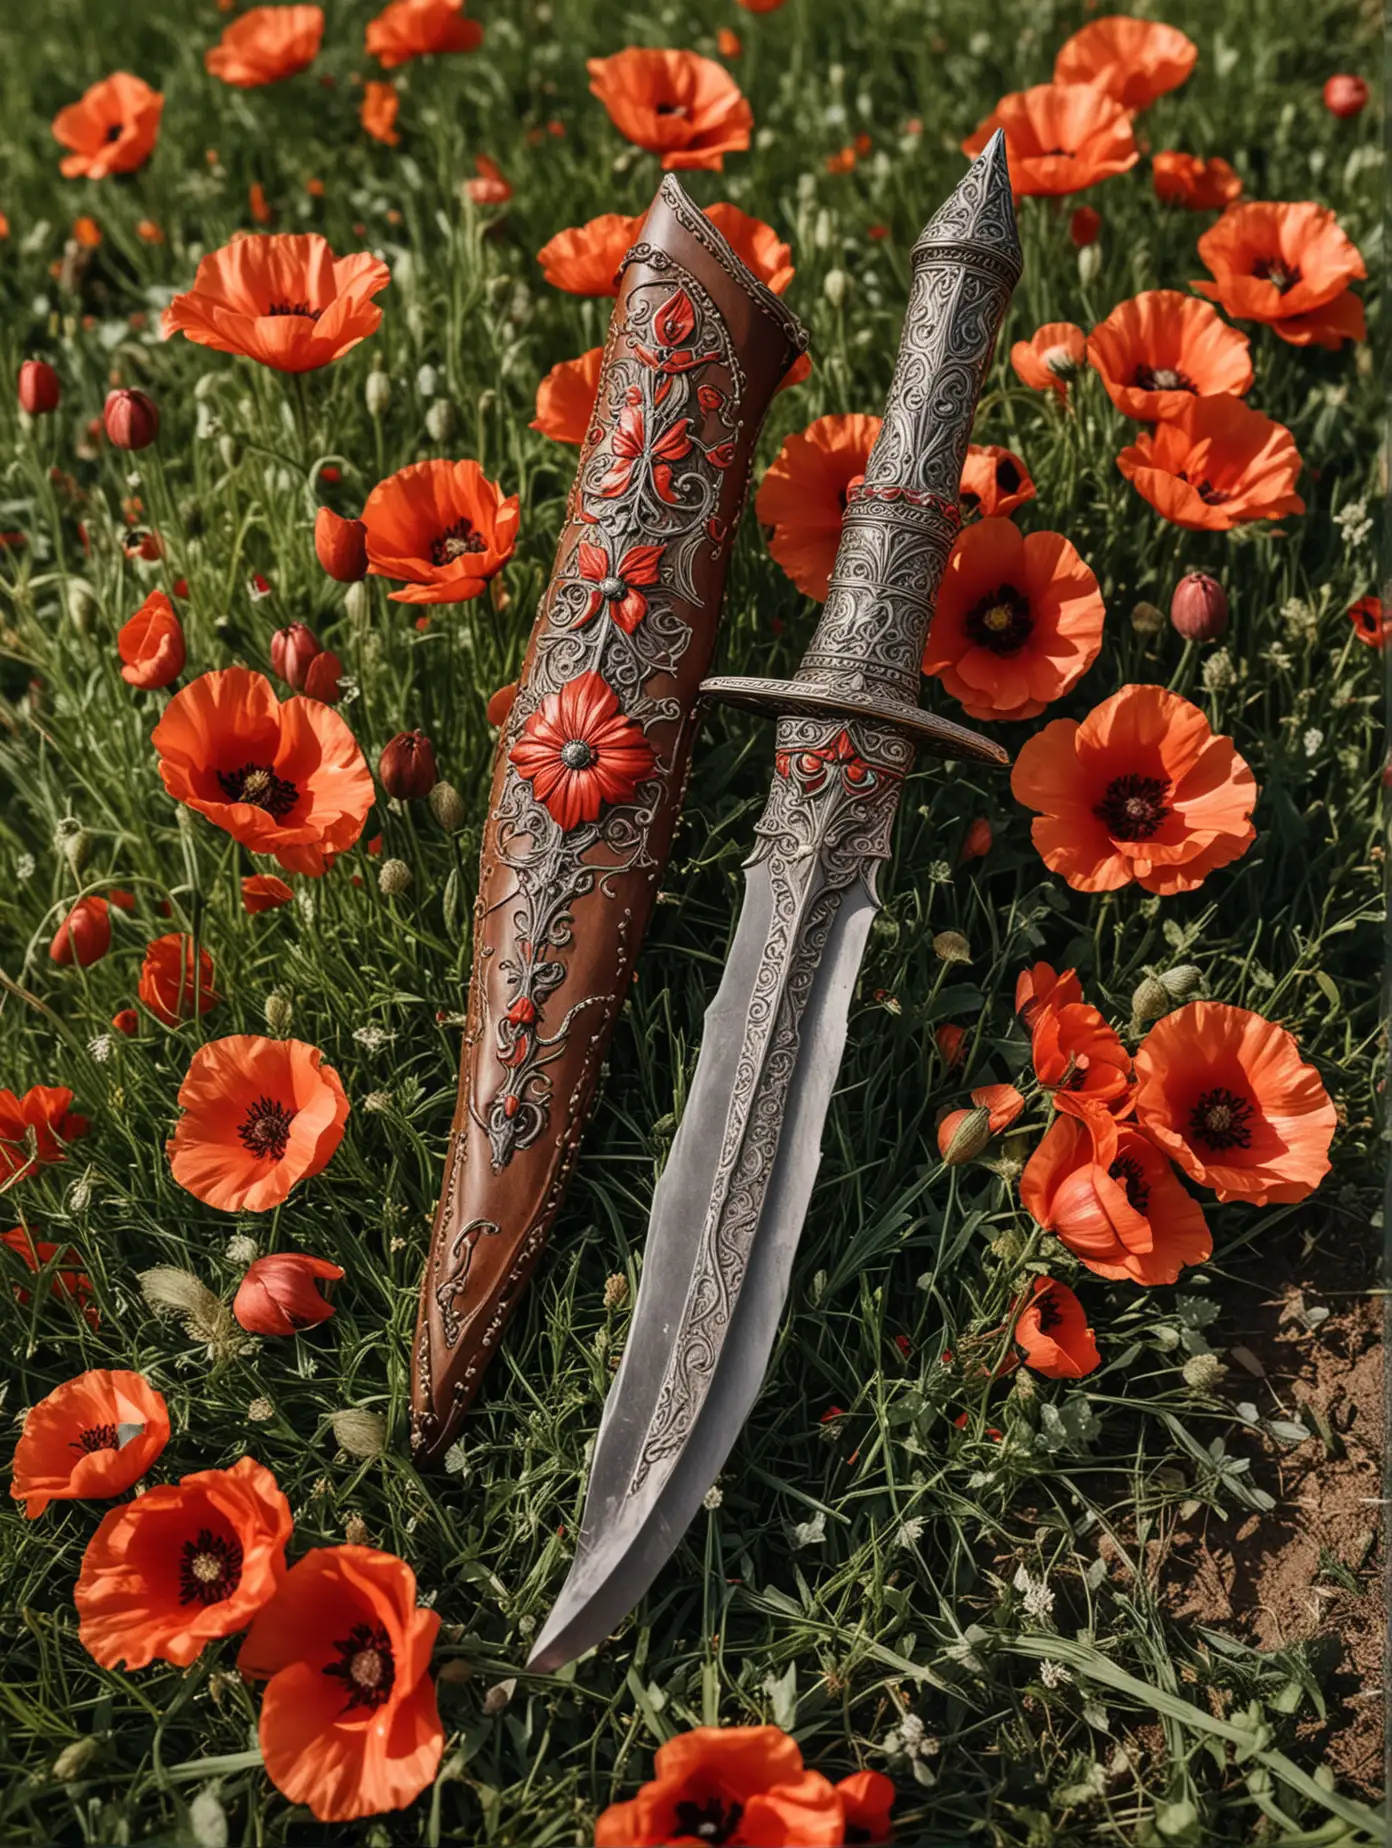 Exquisite-Gypsy-Dagger-Resting-Amongst-Poppies-on-Grass